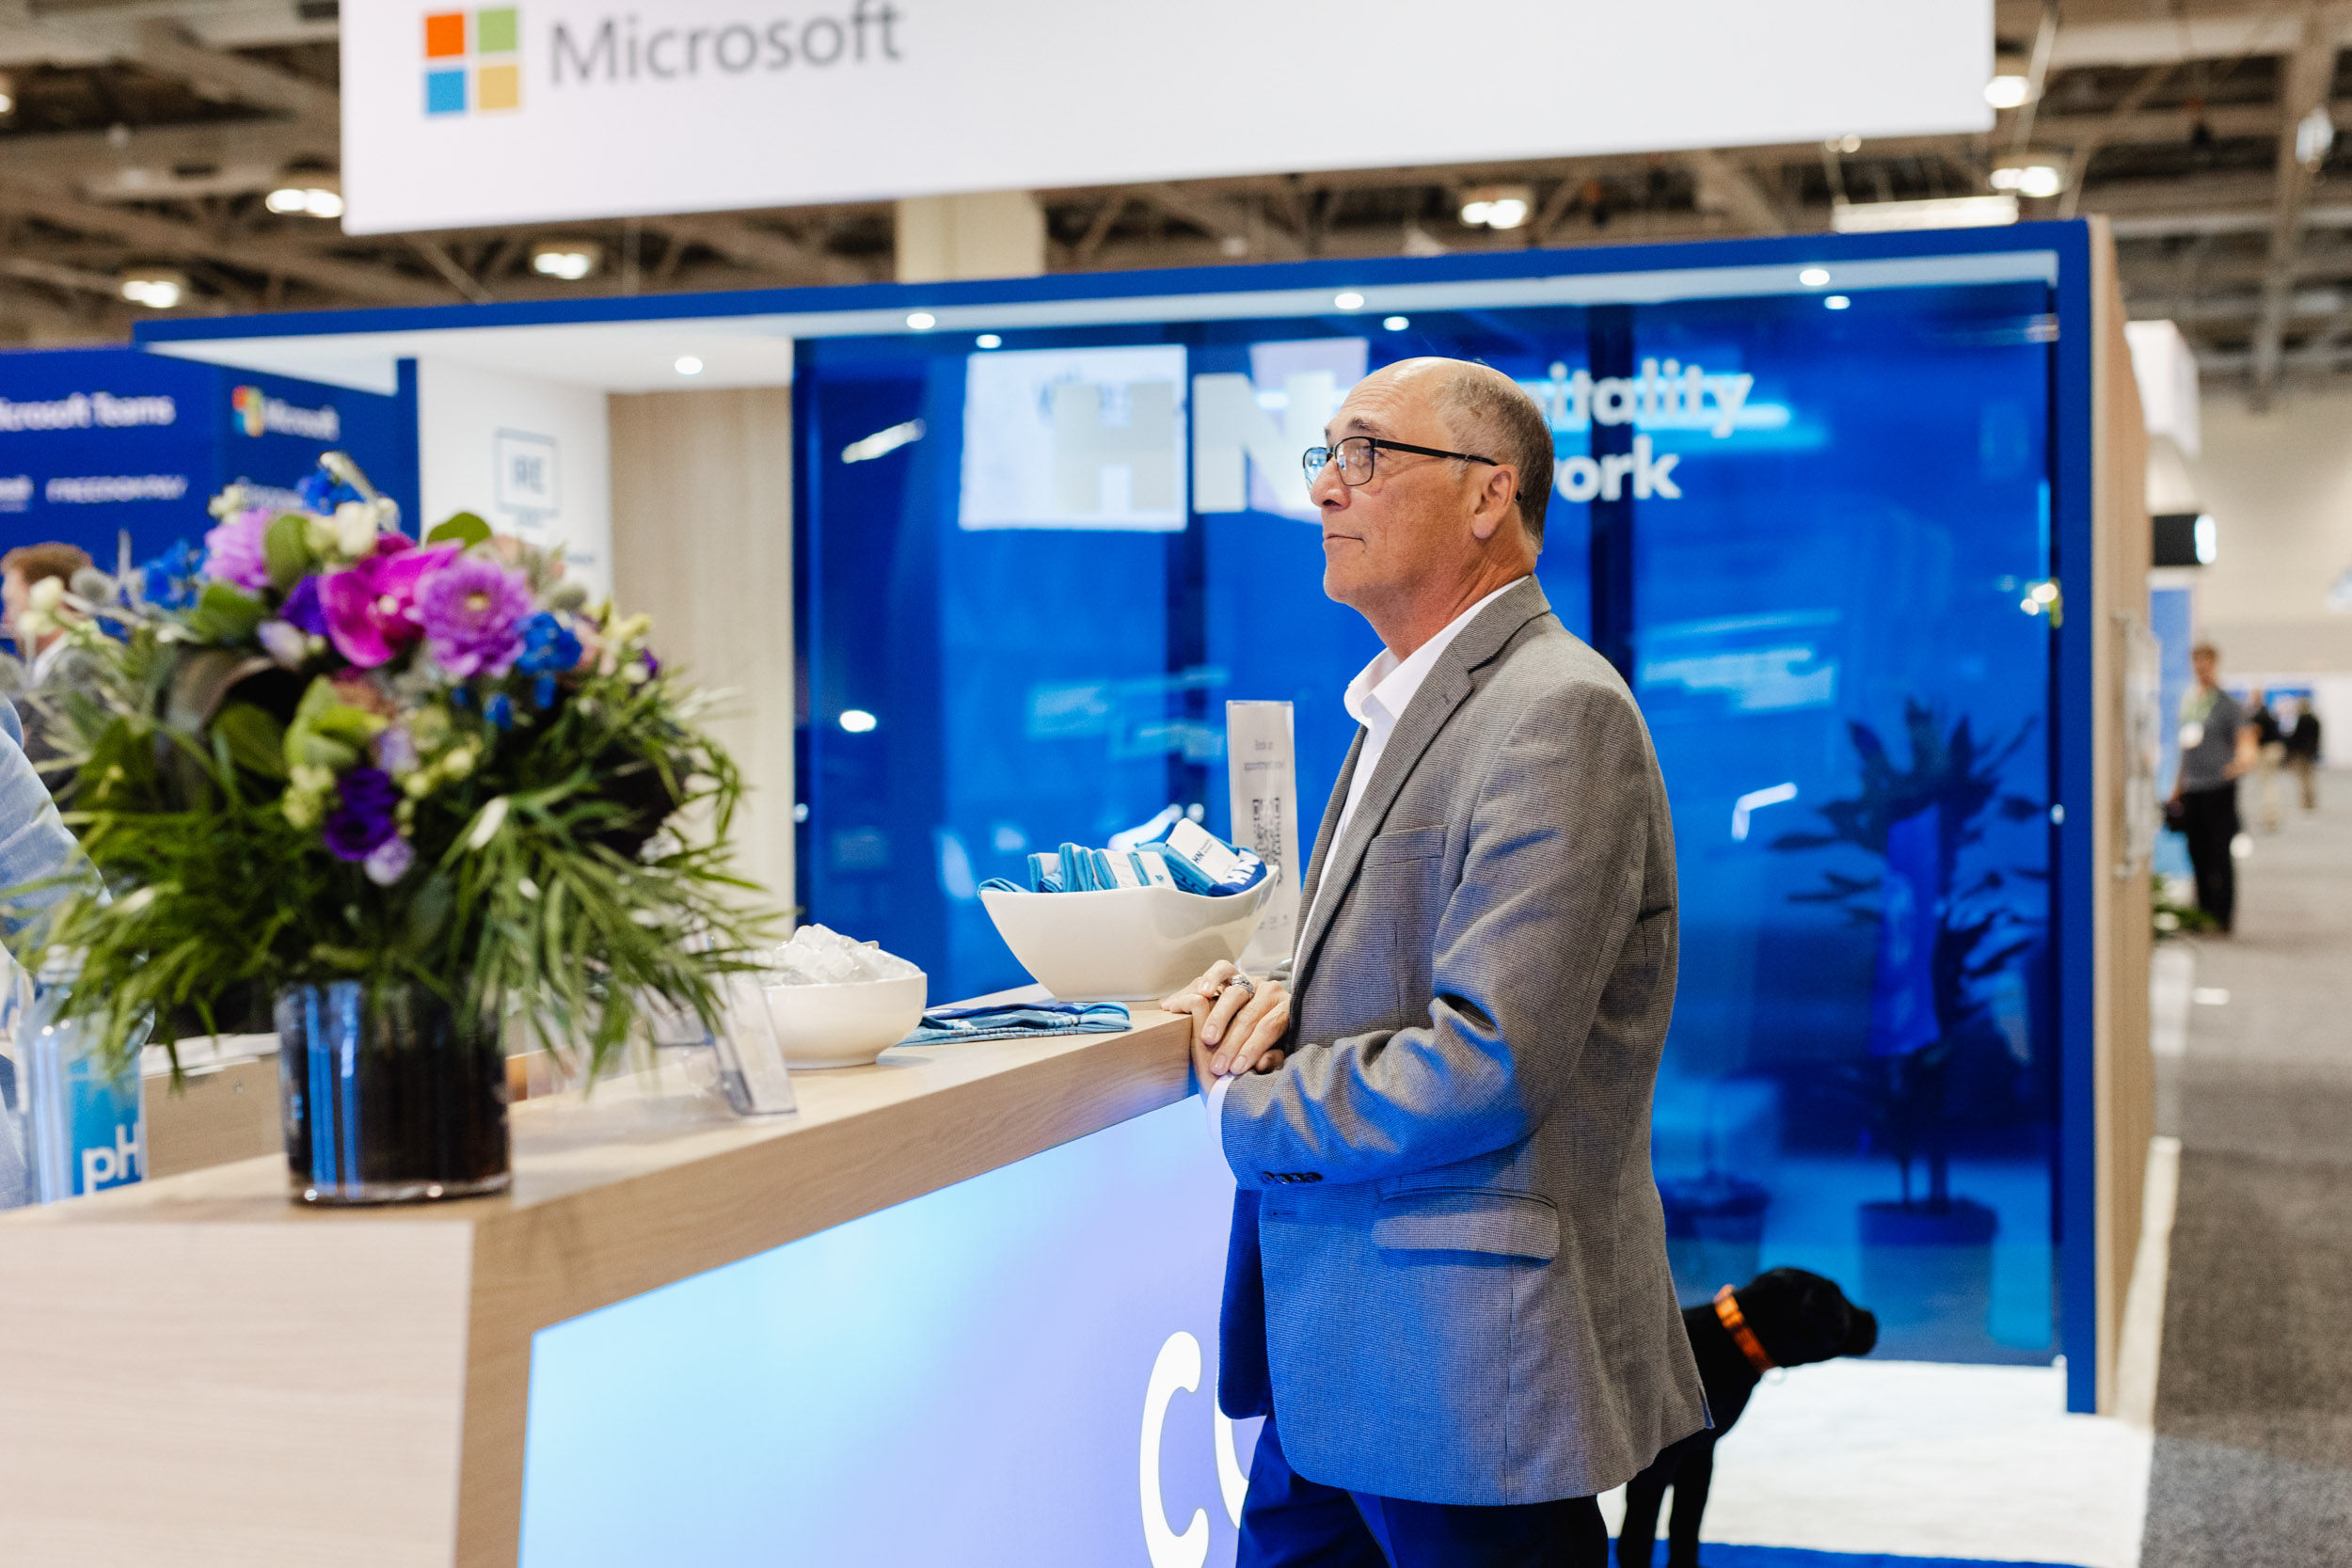 A man photographed at a Toronto trade show in front of a Microsoft booth.